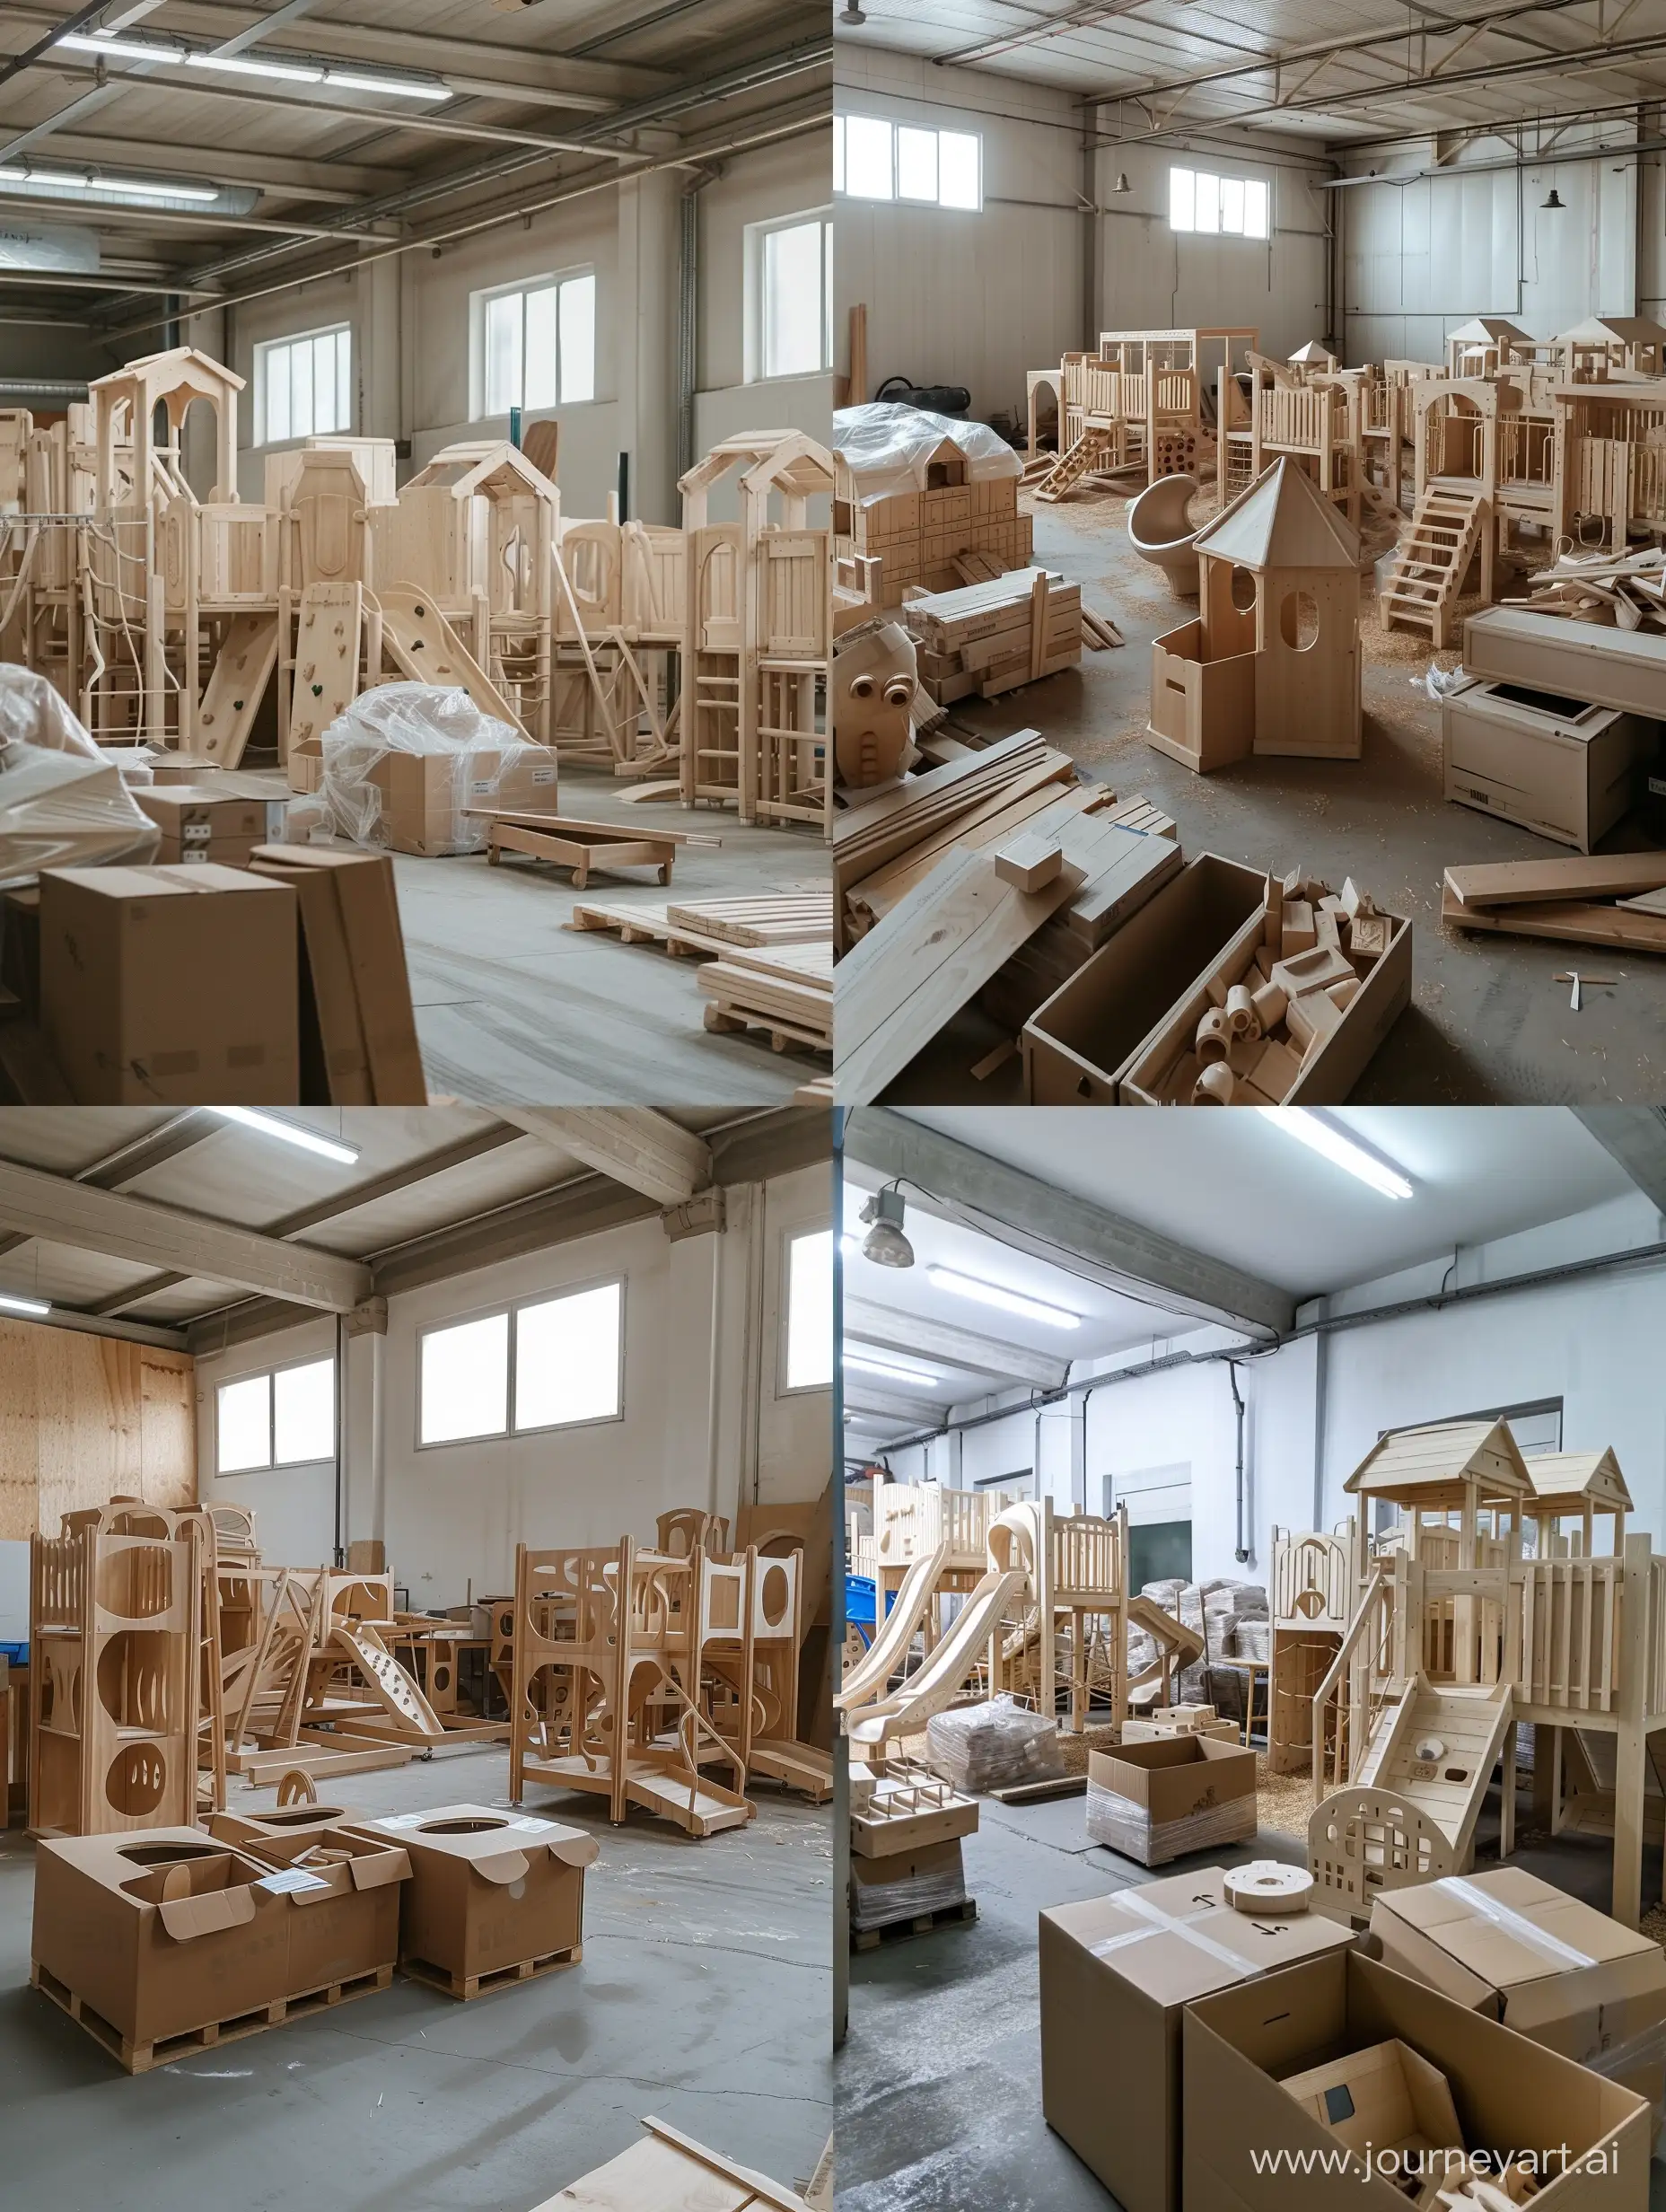 Disassembled-Wooden-Playground-Warehouse